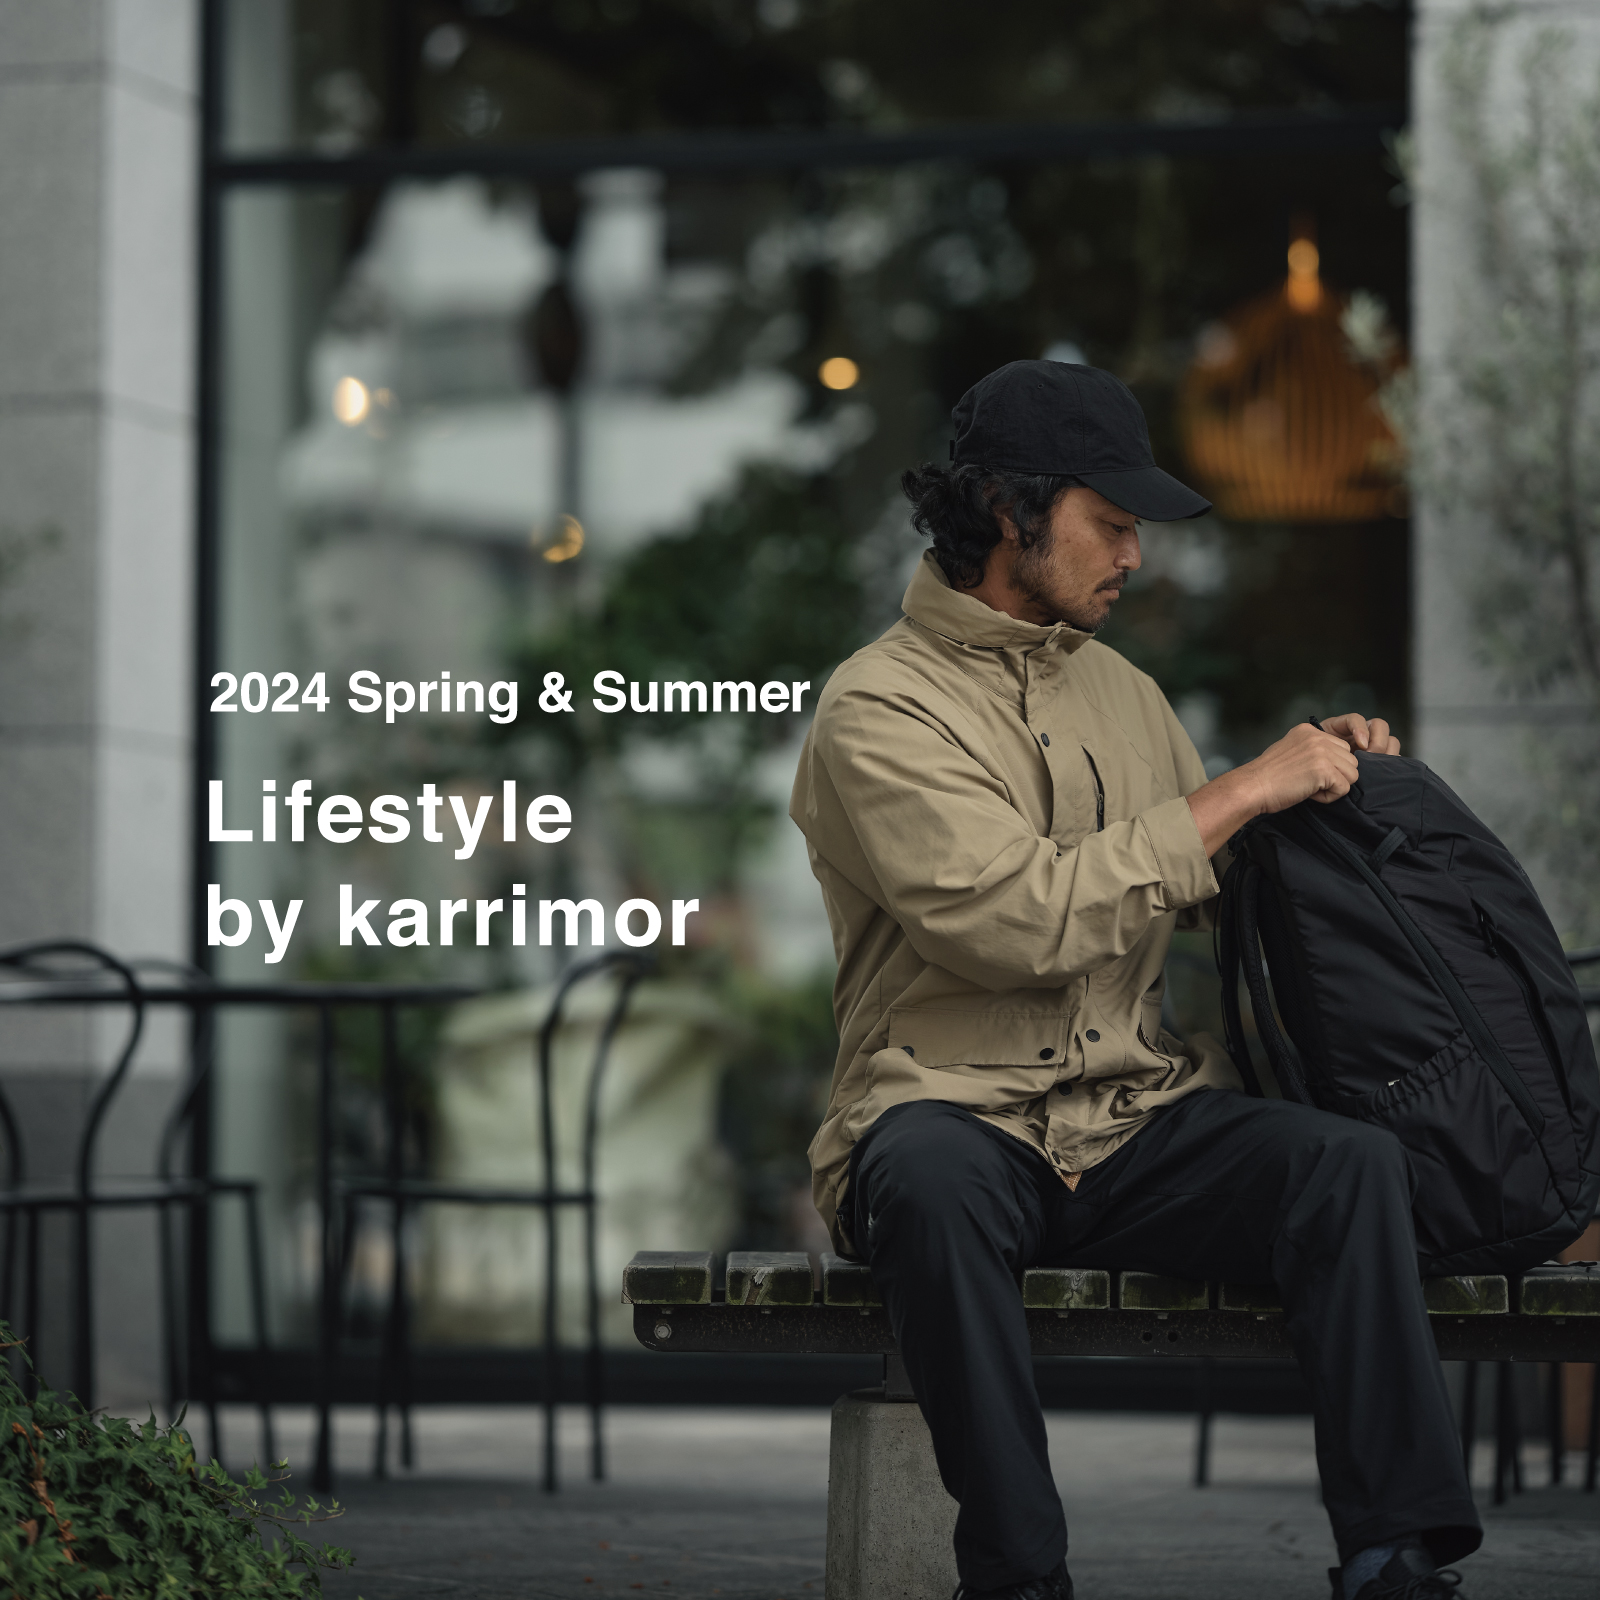 2024 S/S Lifestyle  by karrimor